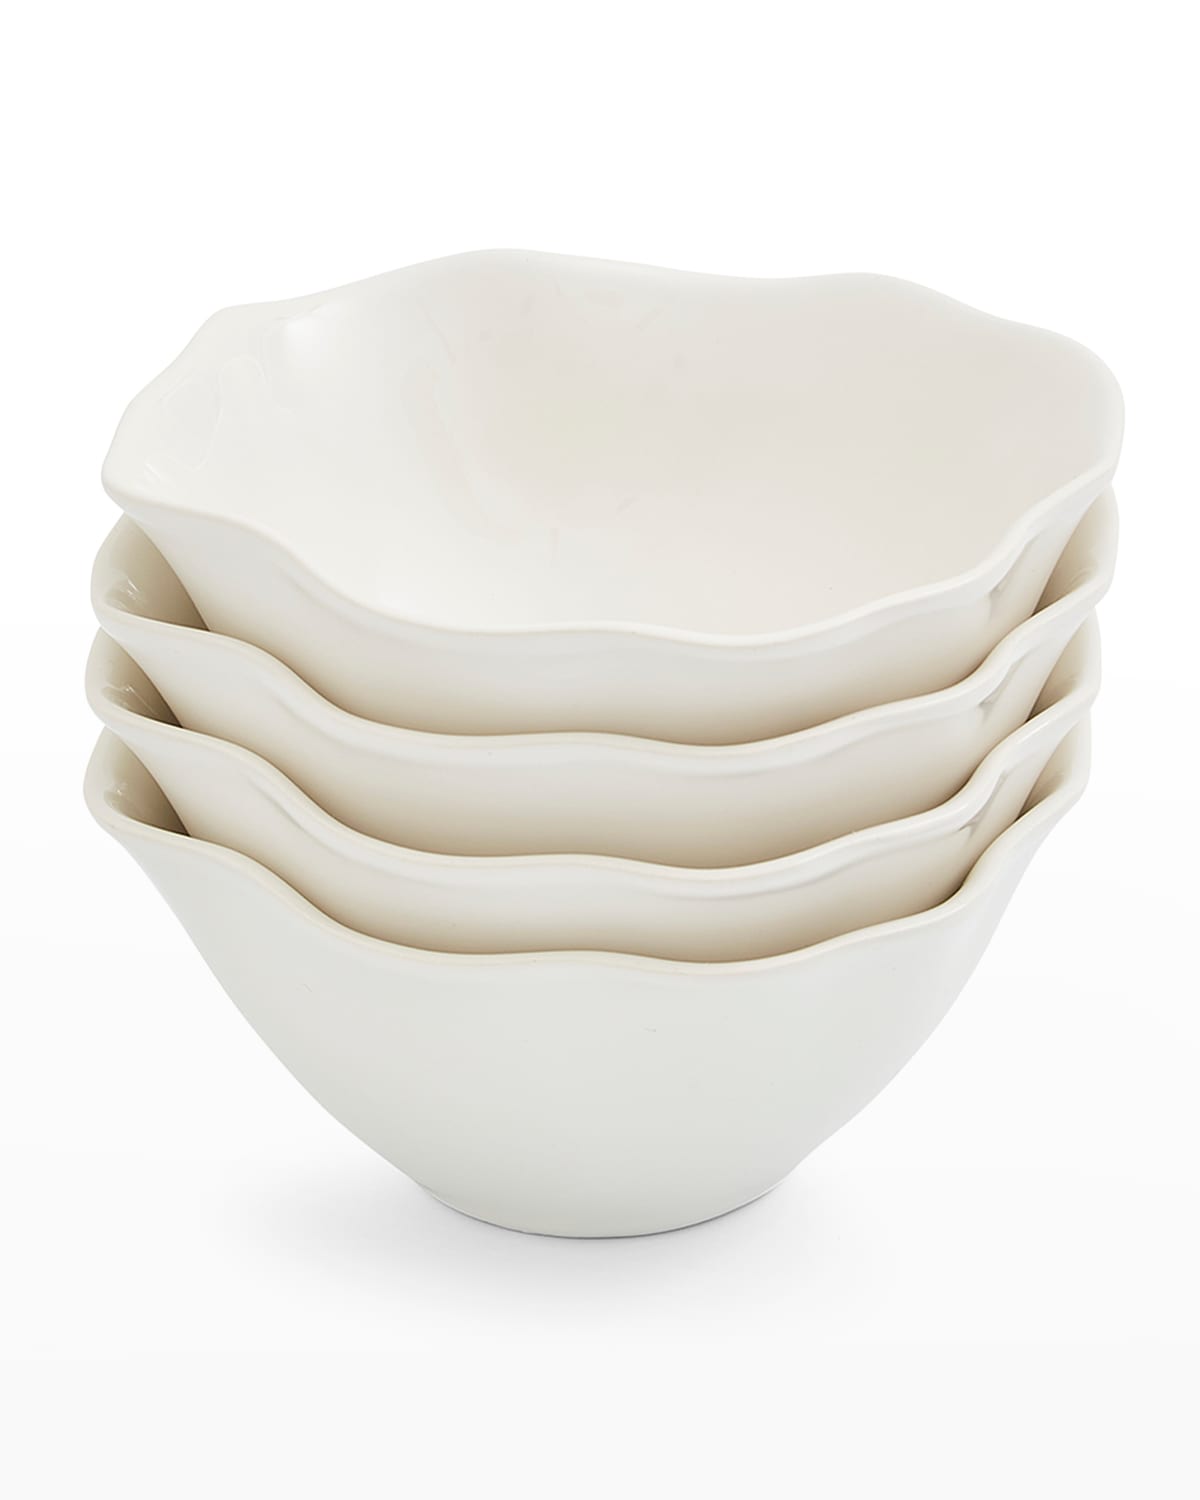 Portmeirion Sophie Conran Floret All-purpose Bowls, Set Of 4 In Creamy White